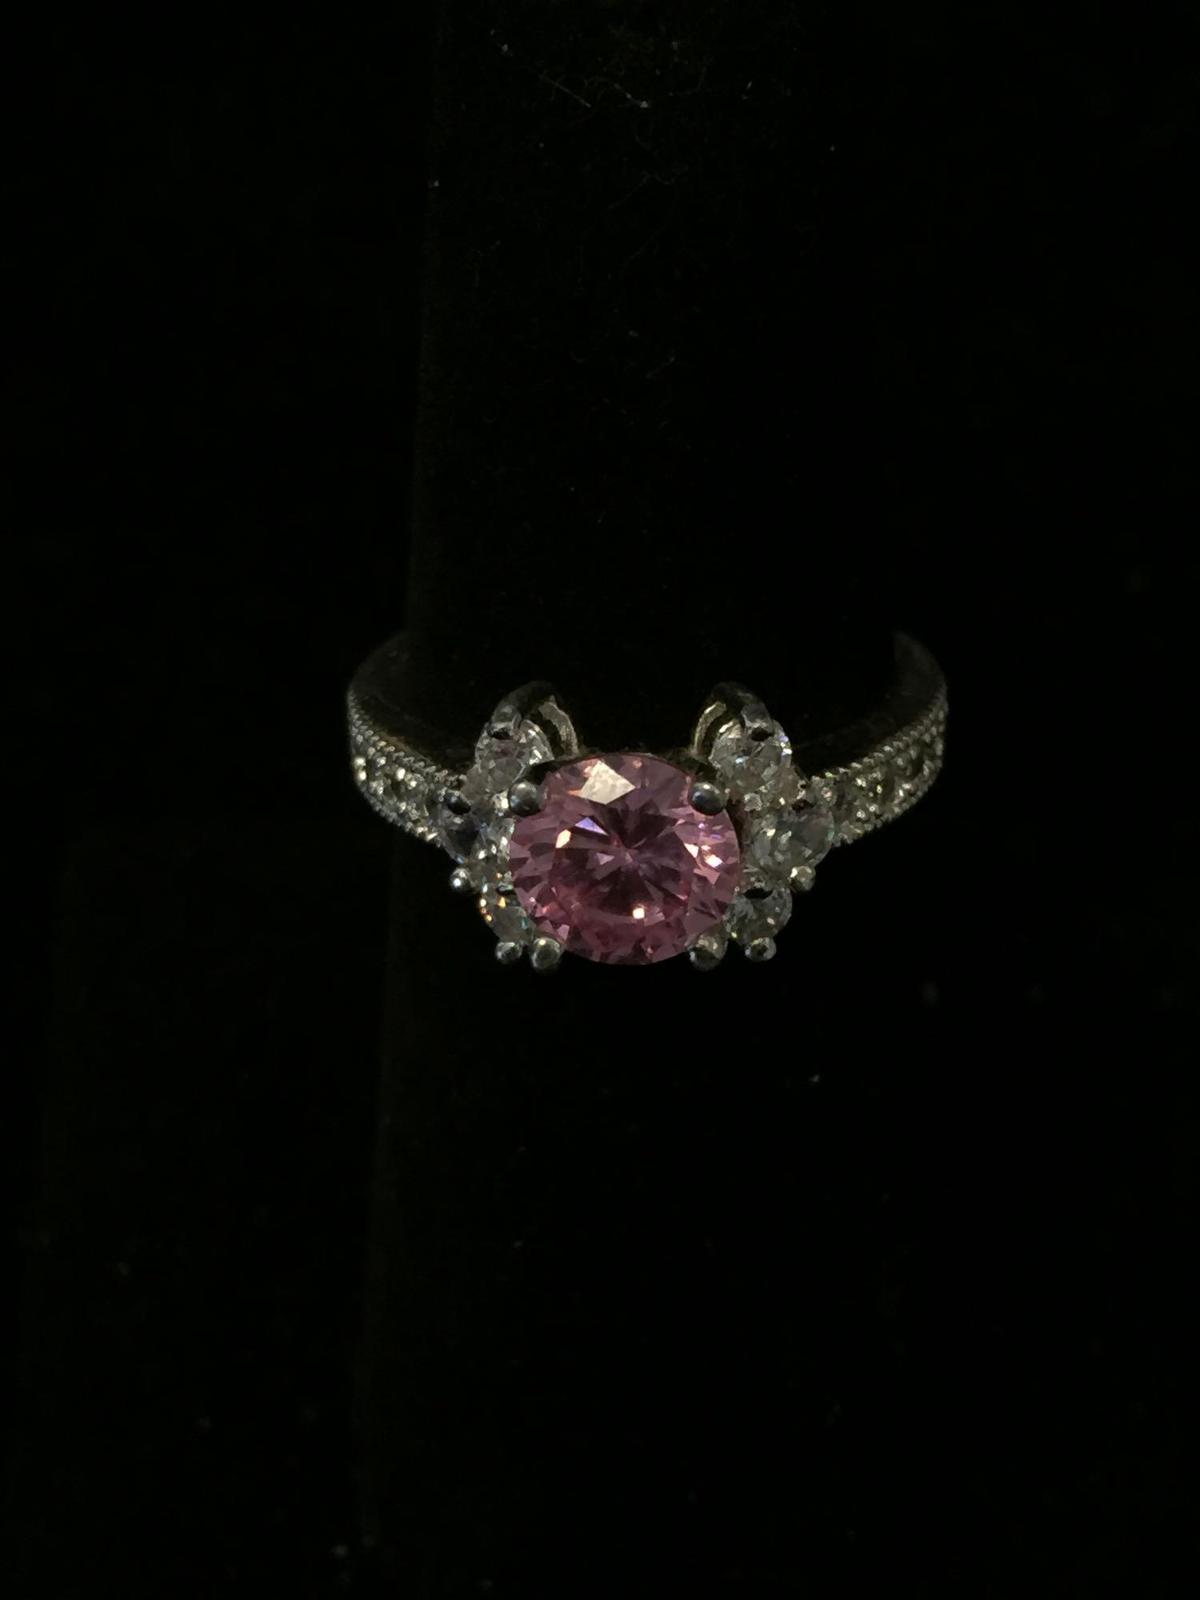 Round Faceted 6.5mm Pink Zircon Center w/ White Zircon Sides Sterling Silver Ring Band-Size 6.5